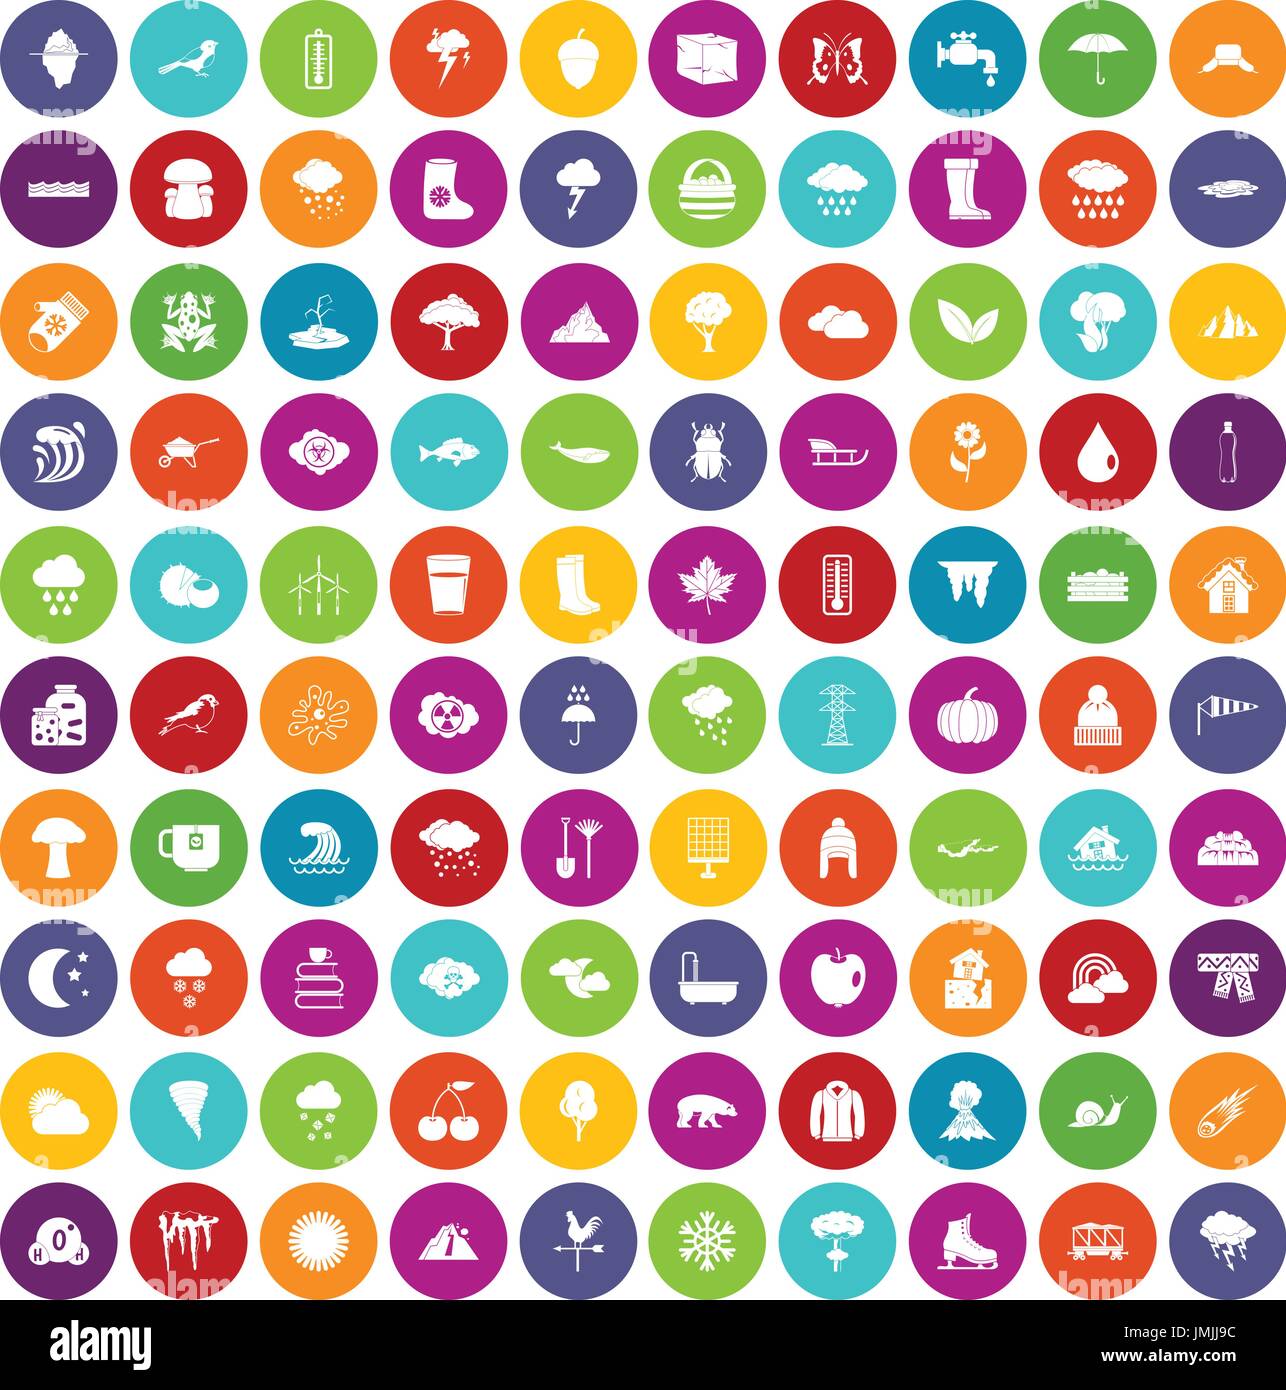 100 clouds icons set color Stock Vector